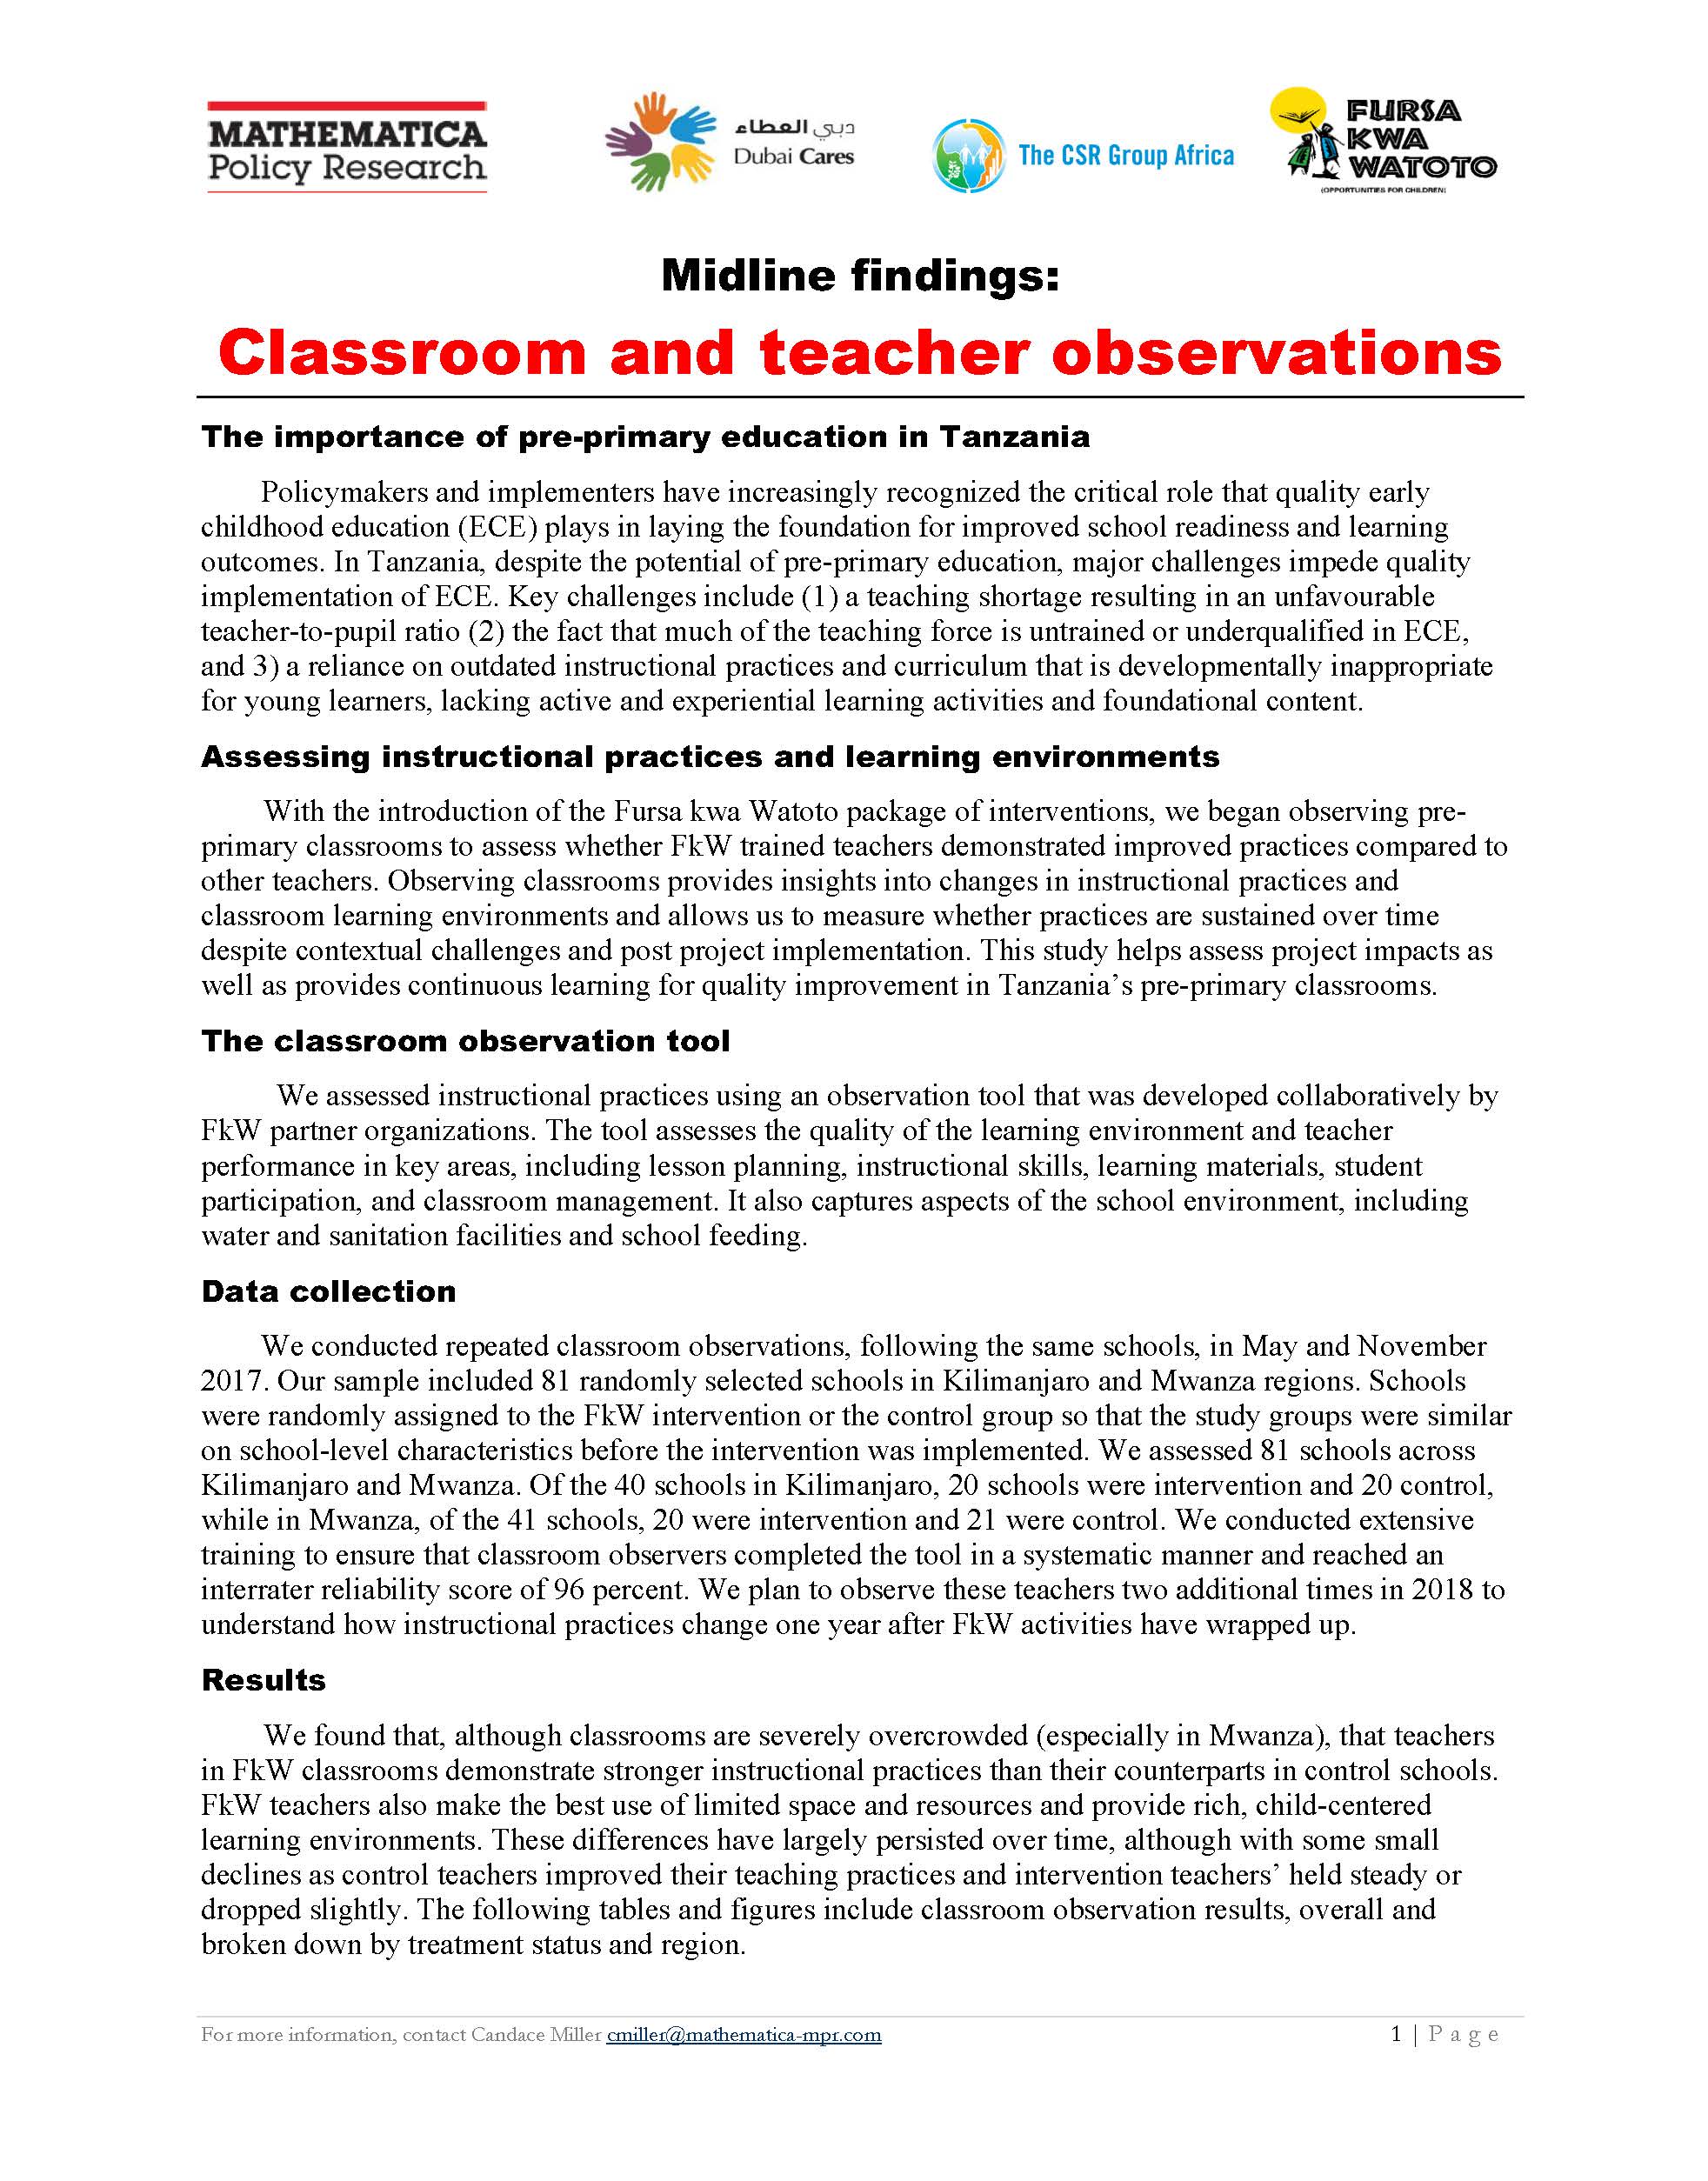 Classroom Observation Results Tables - Learning Agenda